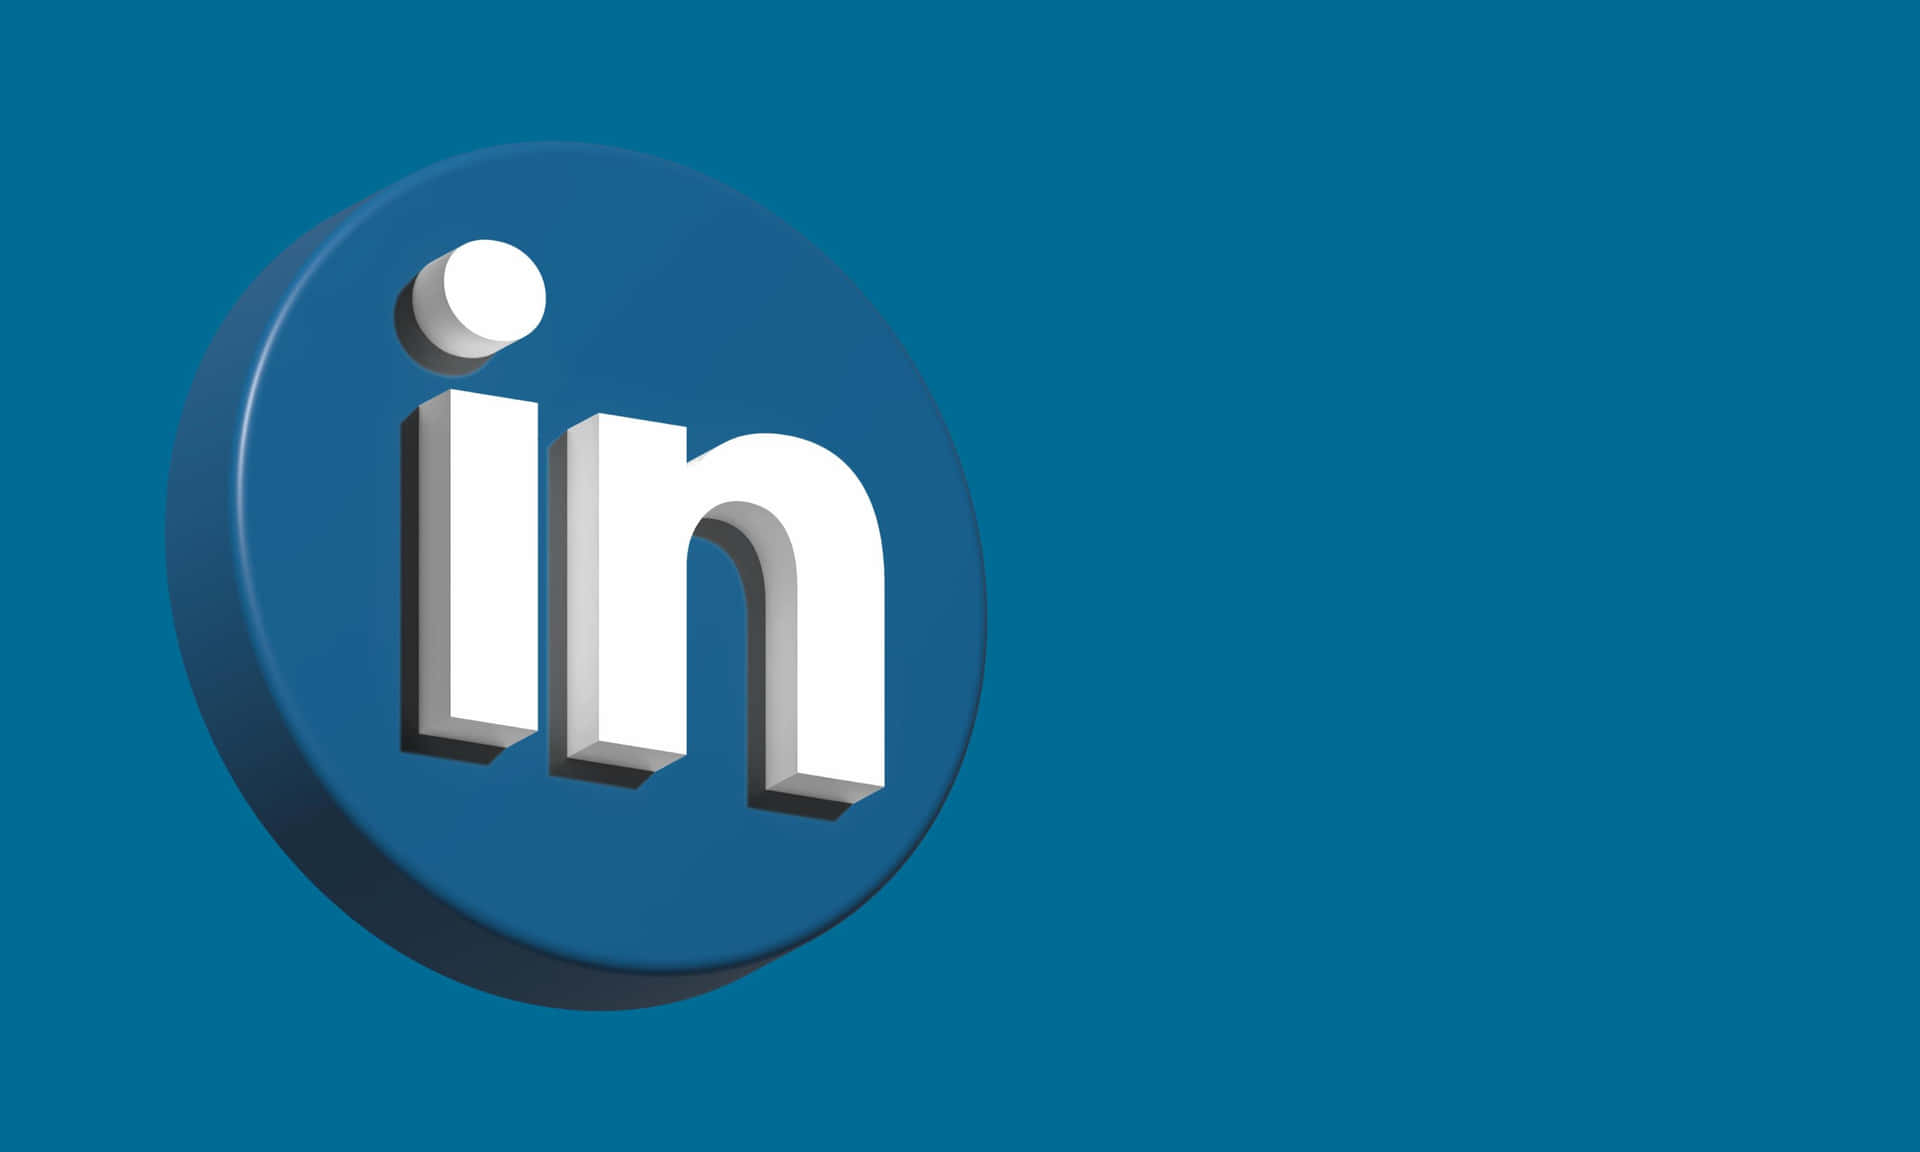 Make smarter connections with LinkedIn